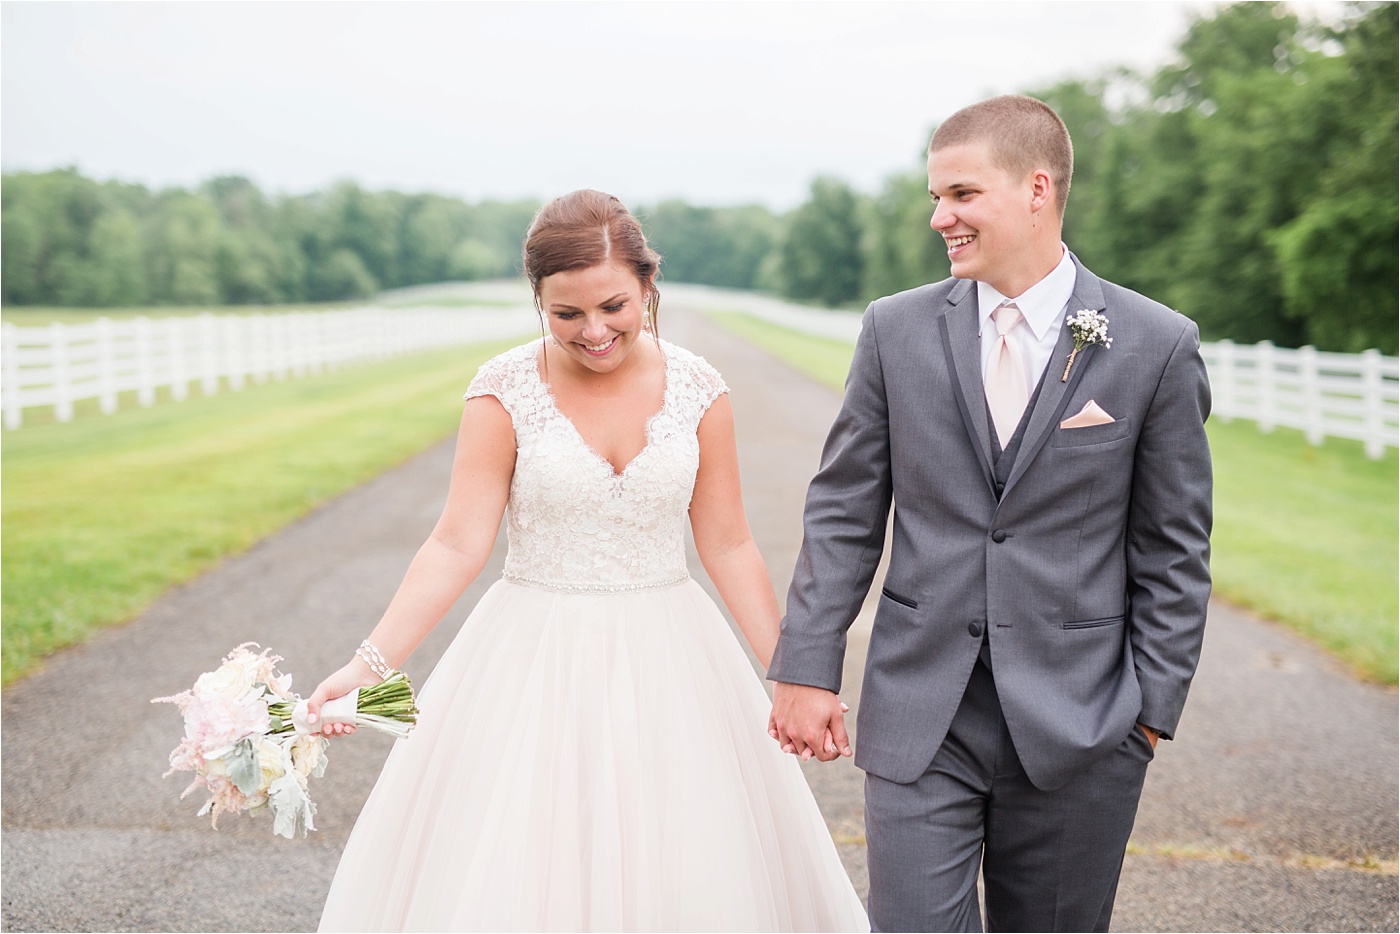 A Blush Outdoor wedding at Irongate Equestrian | KariMe Photography_0152